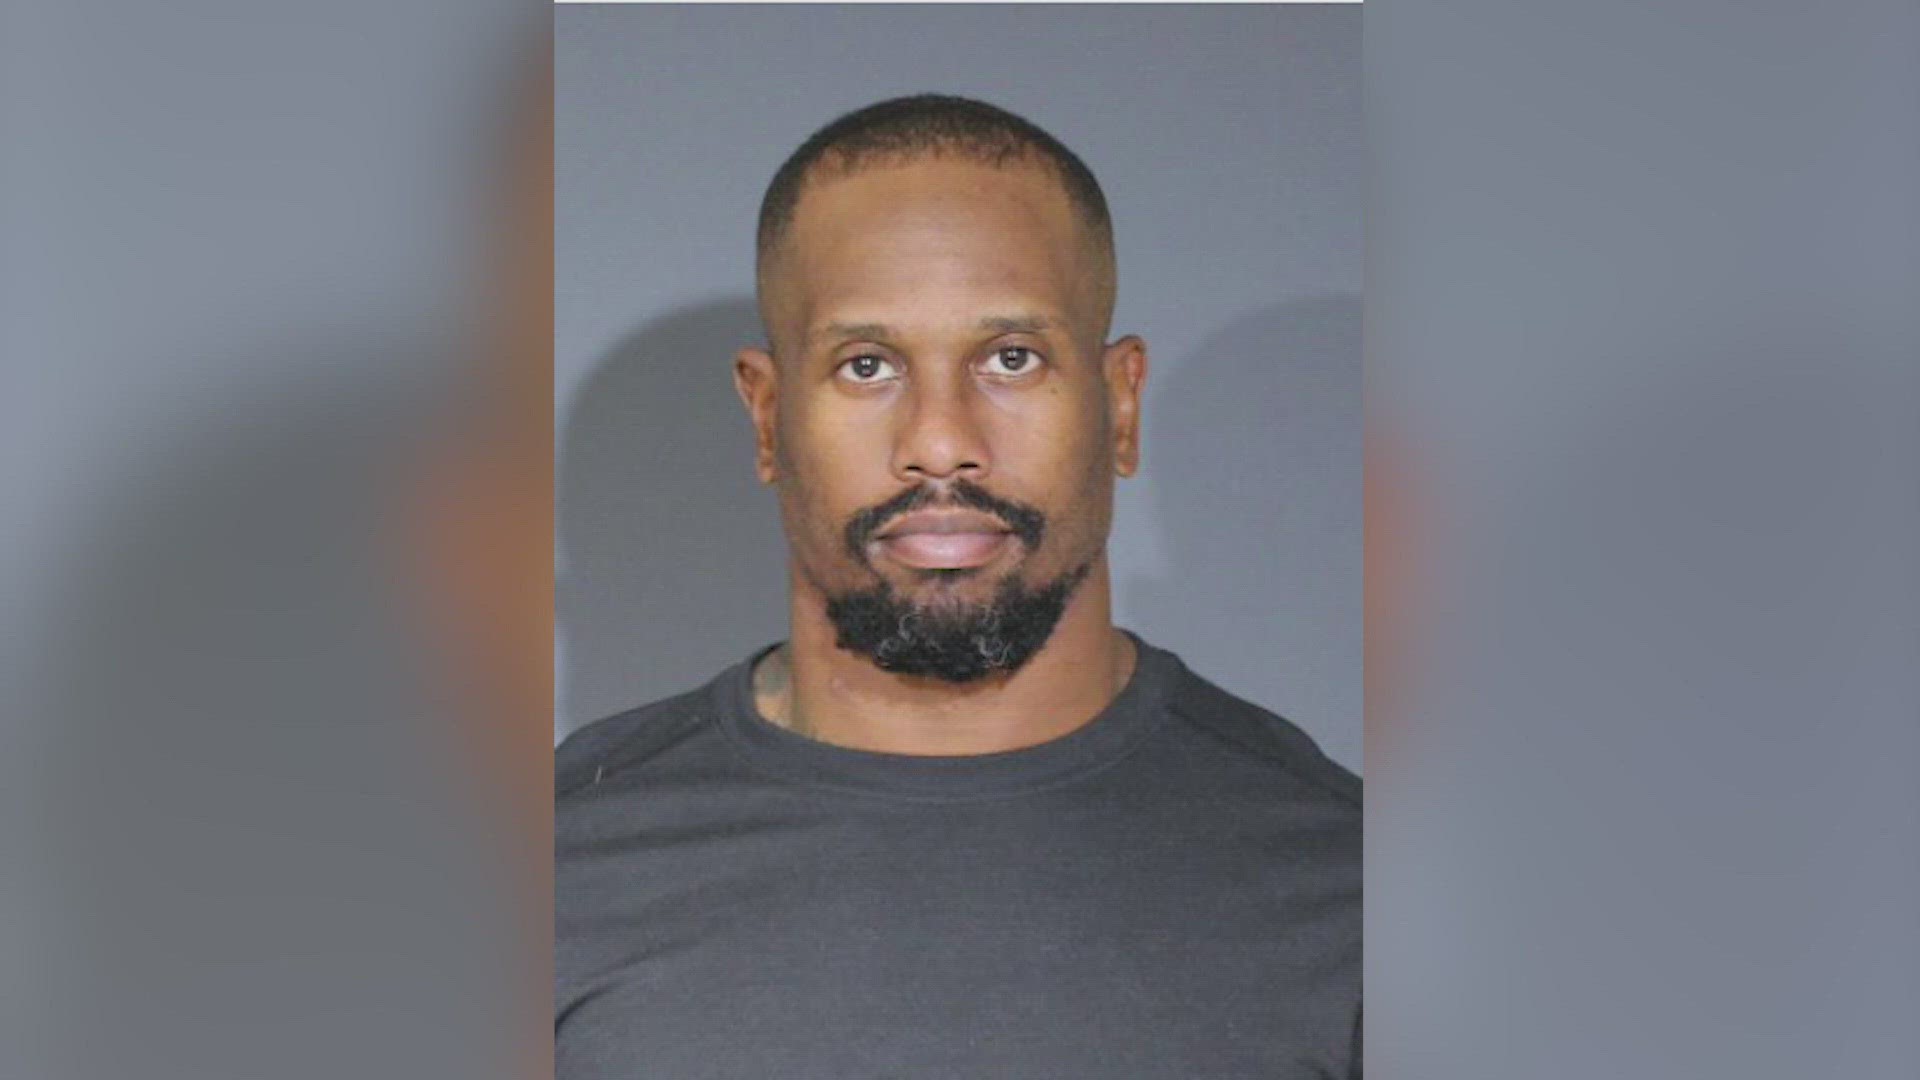 Buffalo Bills linebacker Von Miller faces a charge of assault of a pregnant person.